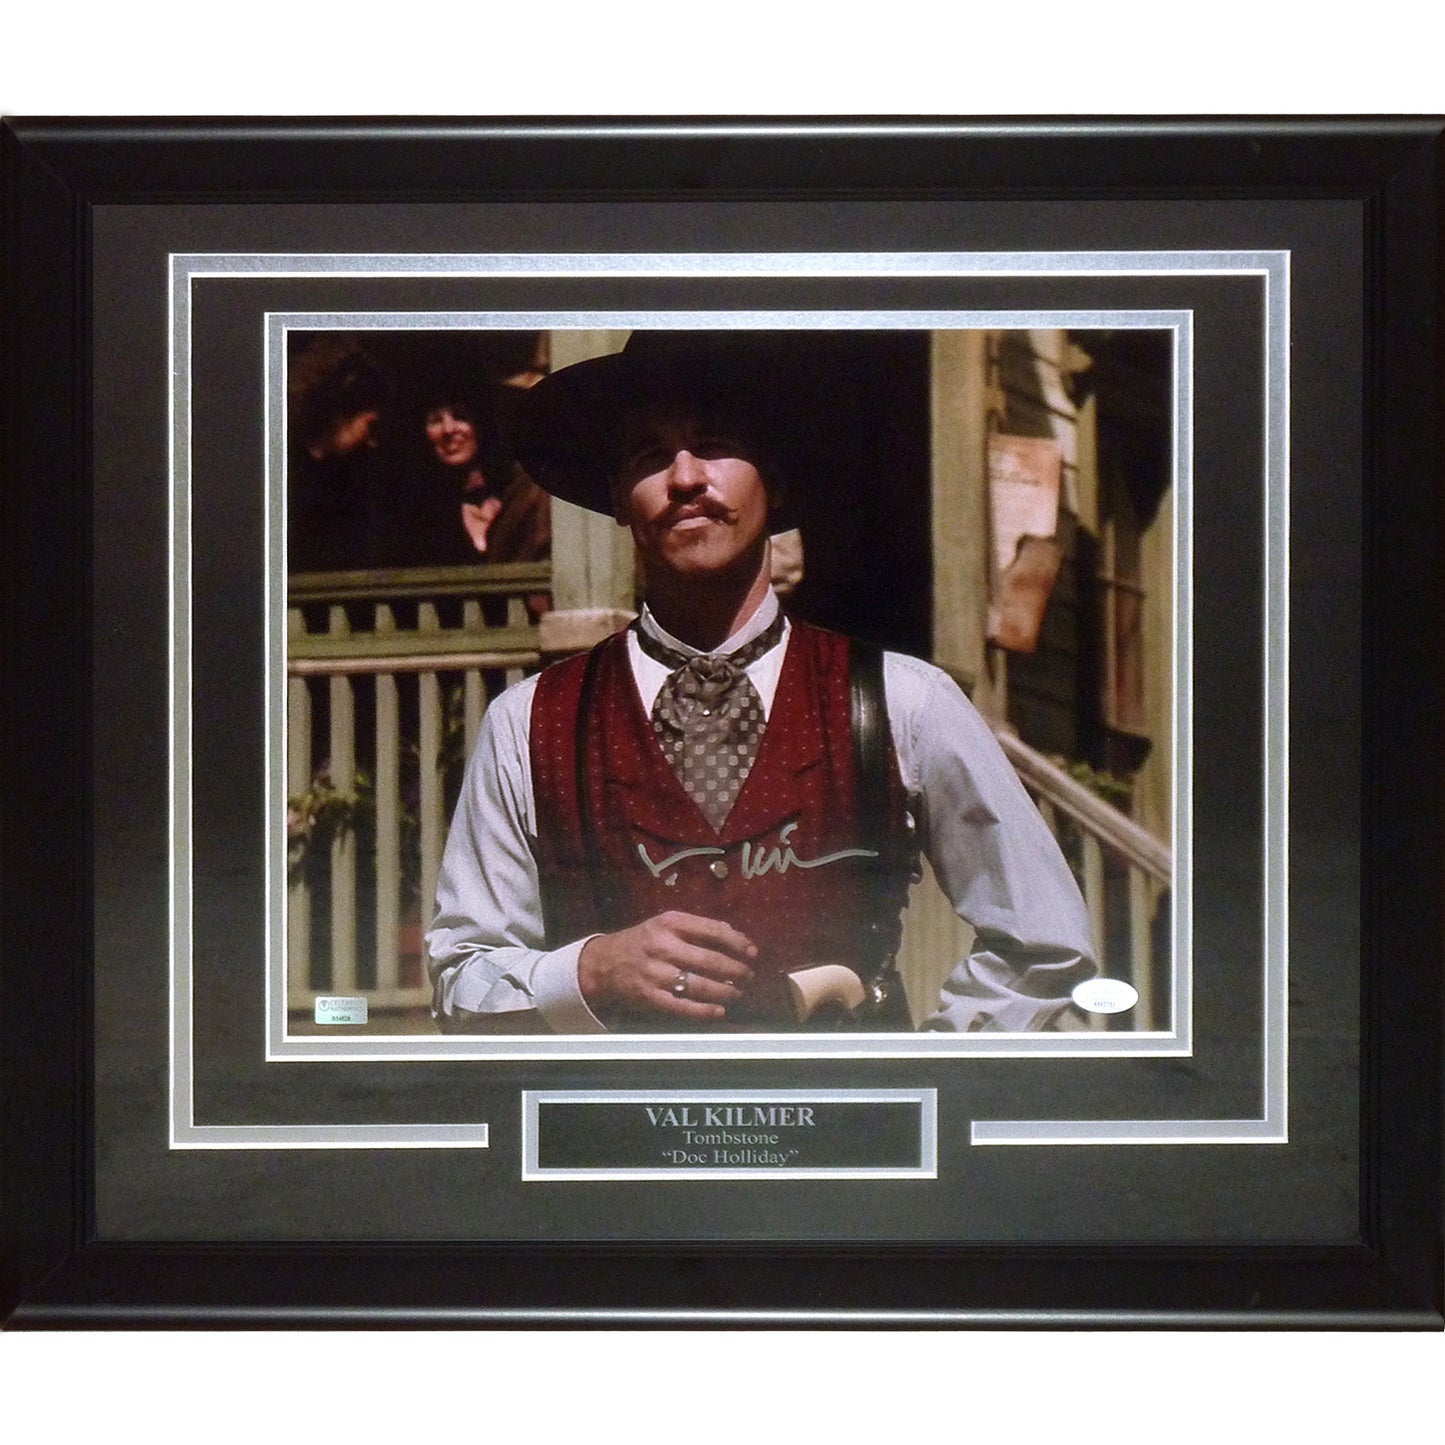 Val Kilmer Autographed TOMBSTONE Deluxe Framed 11x14 Photo - JSA